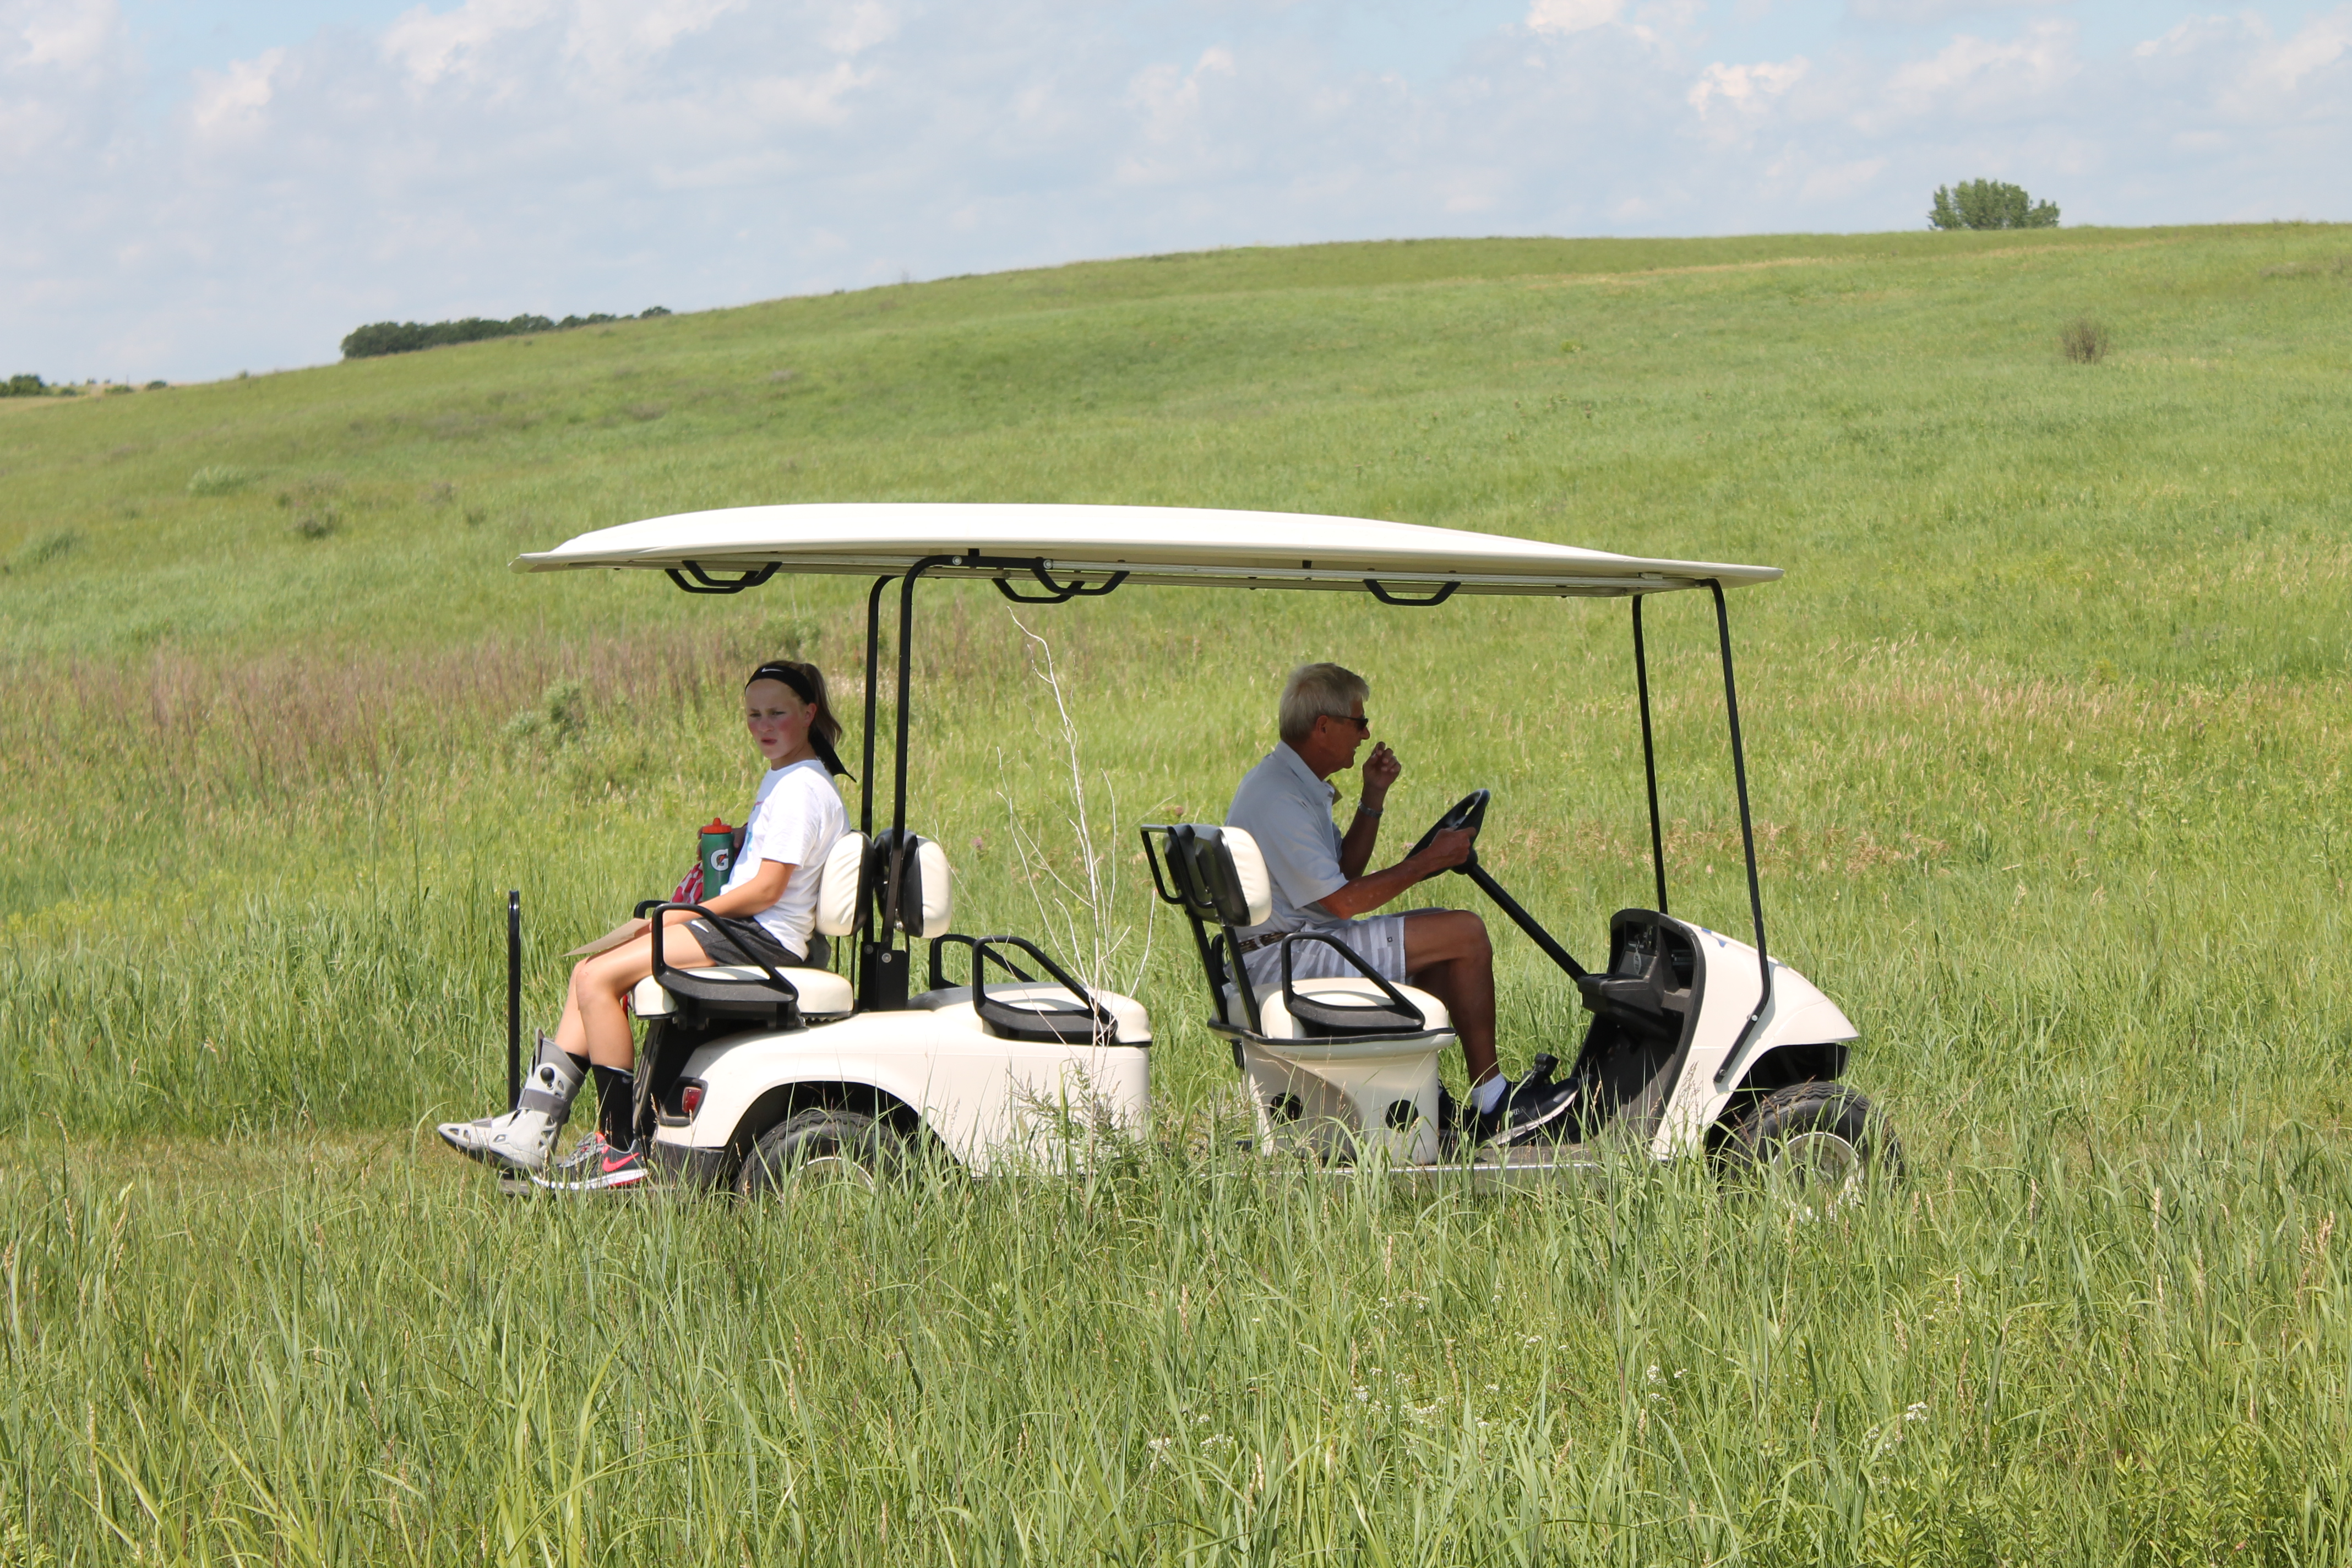 A camper with a cast rides the golf cart on the trails through the summer prairie.